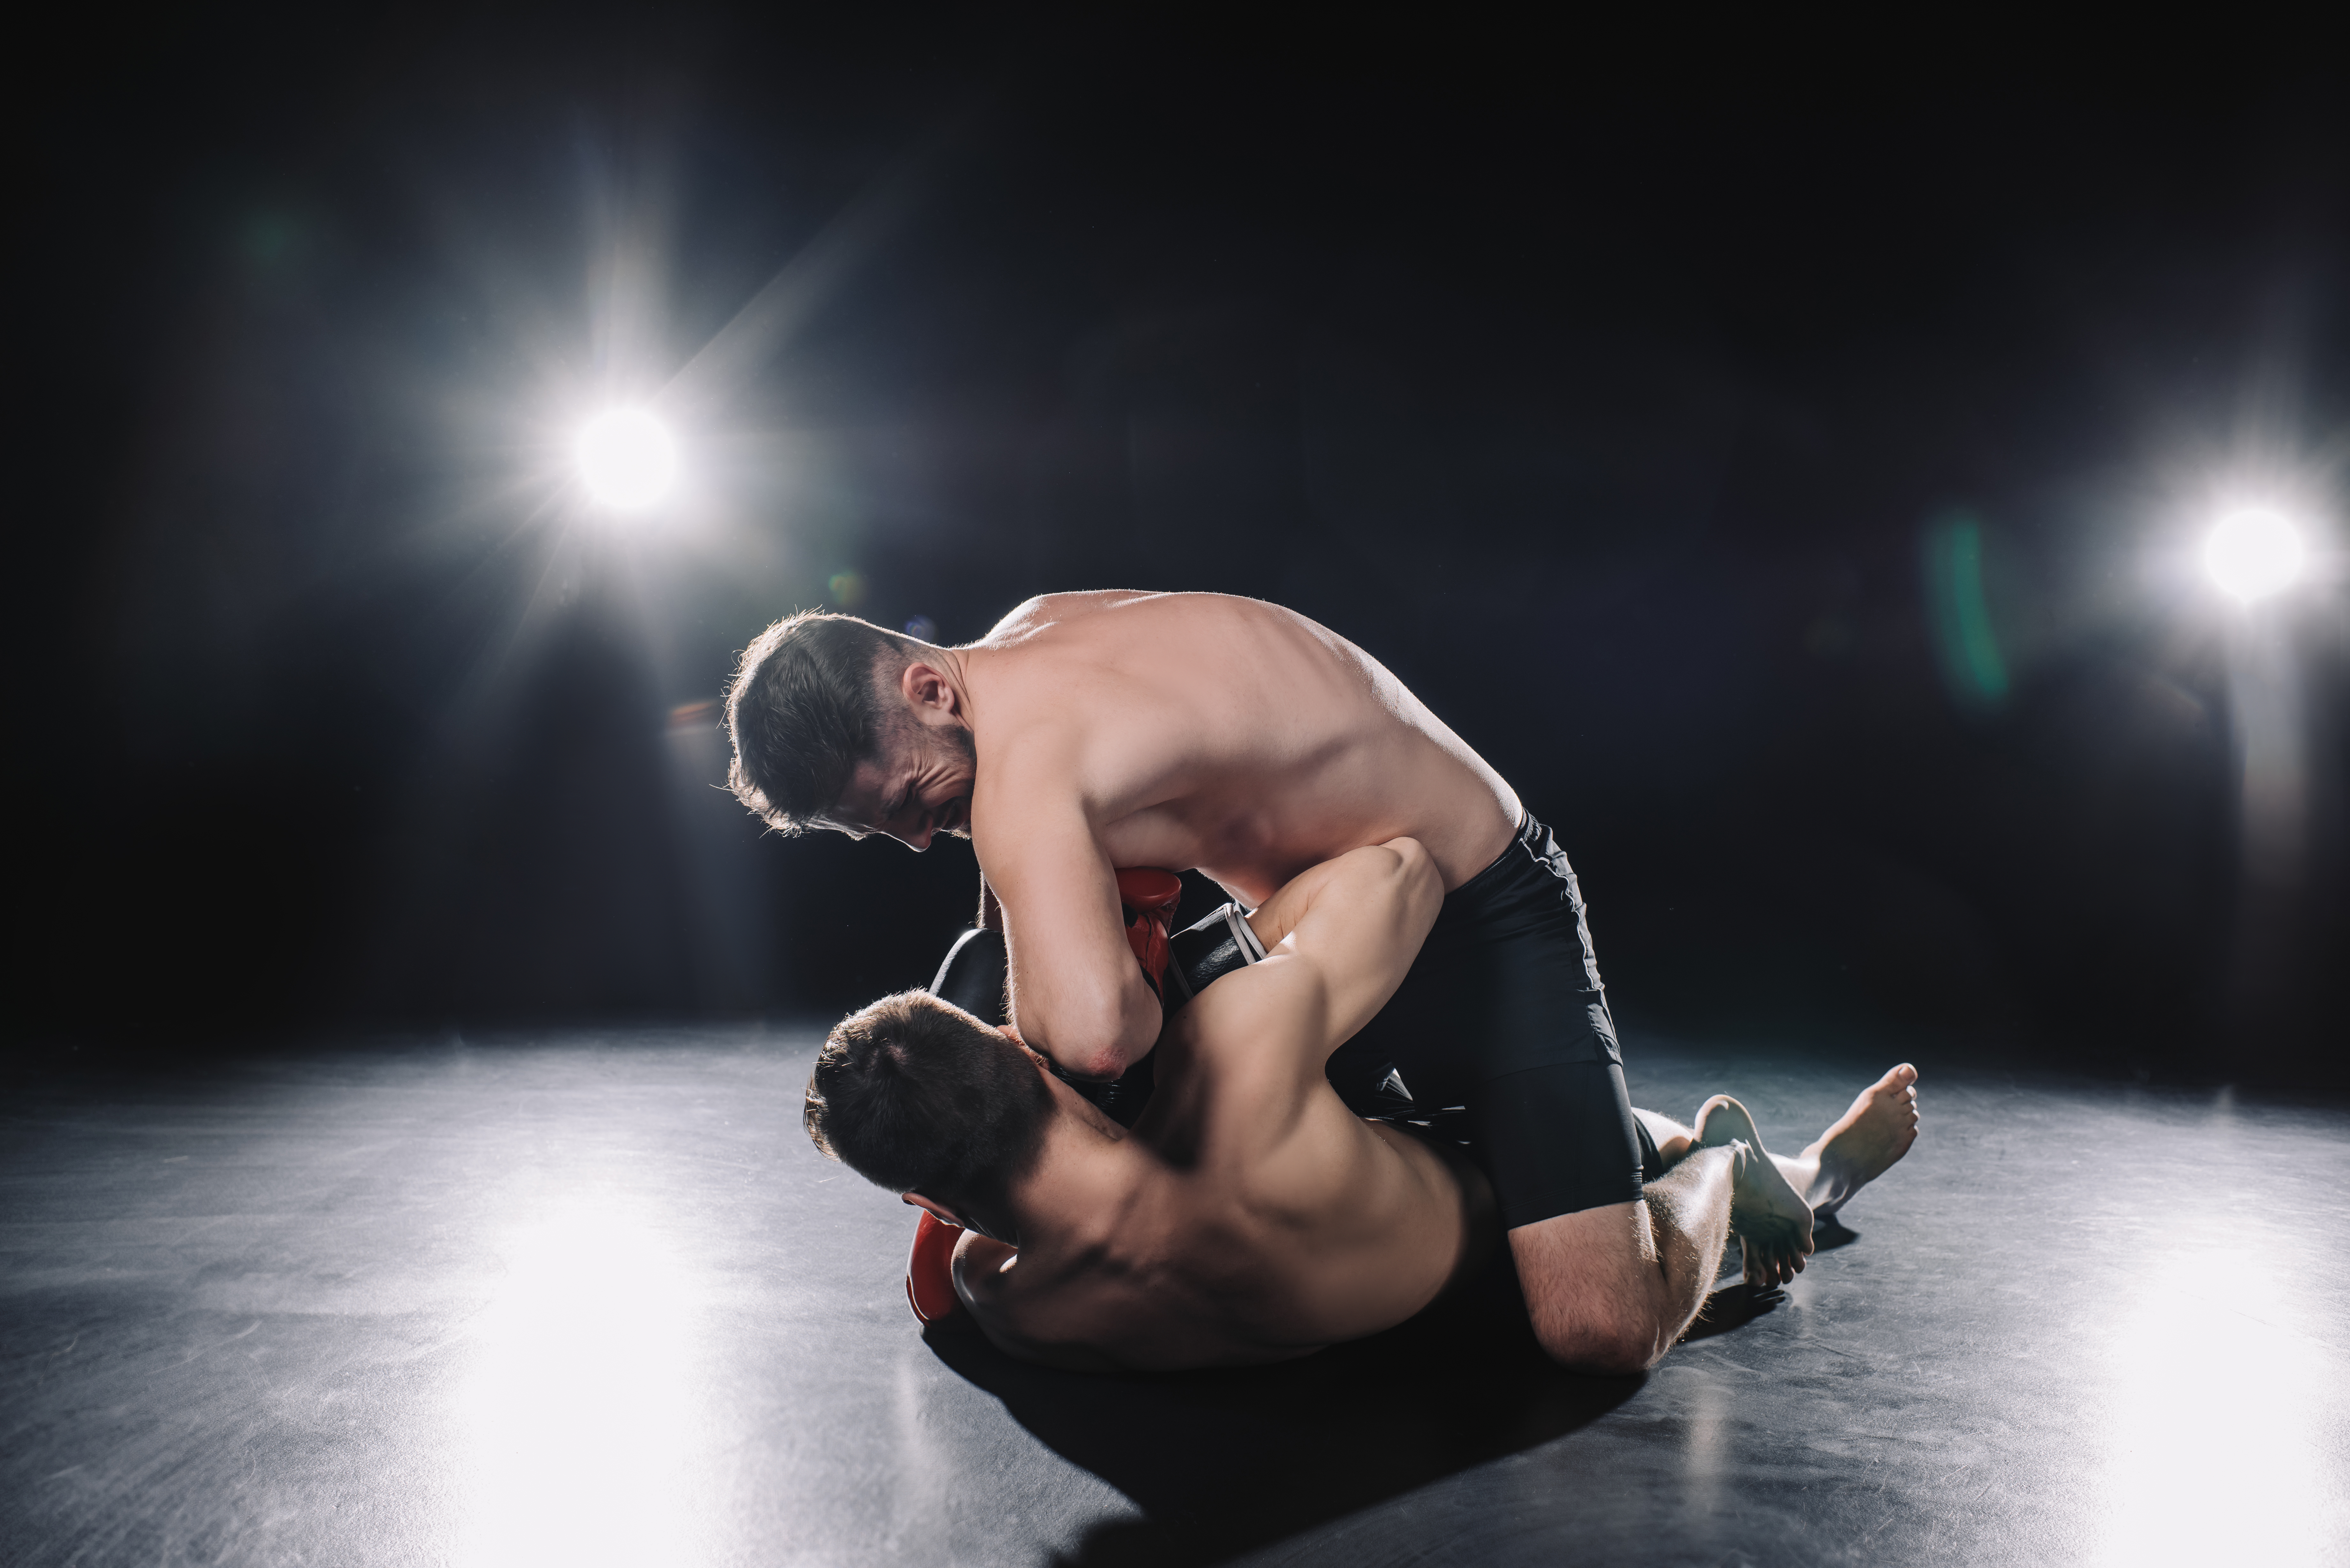 How to Get Into MMA – 10 Tips